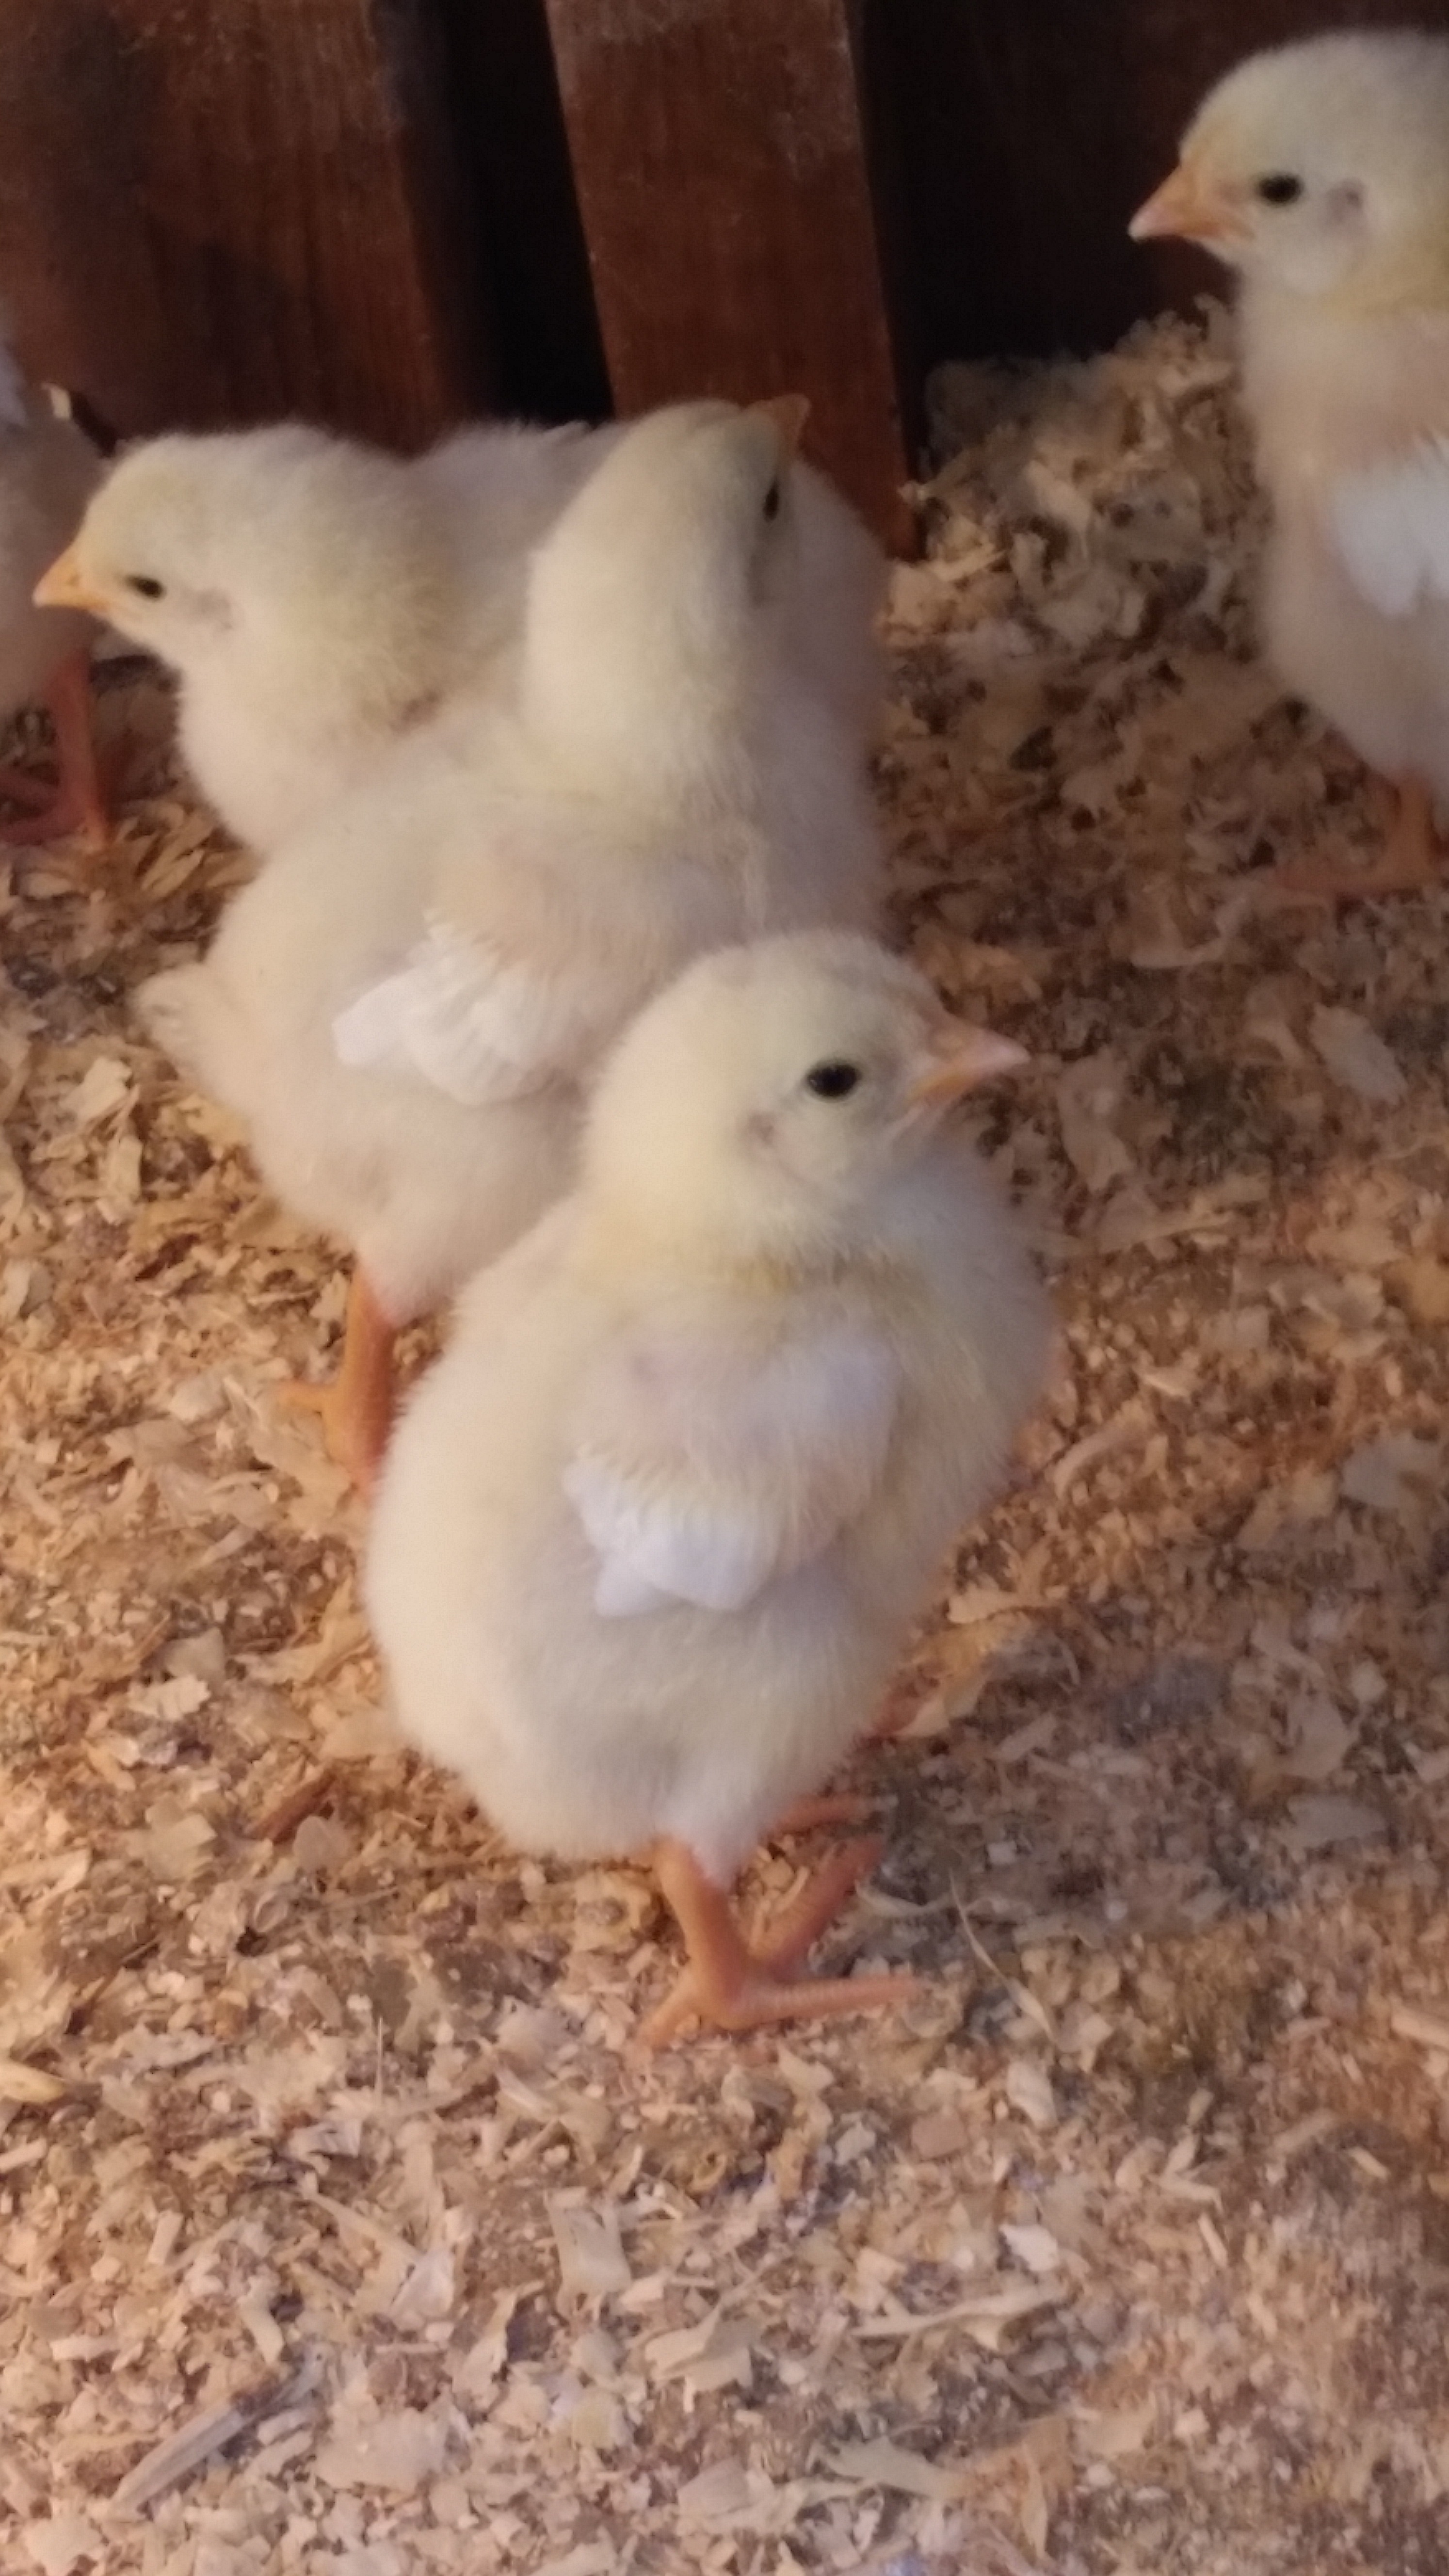 Day old chicks in Brooder